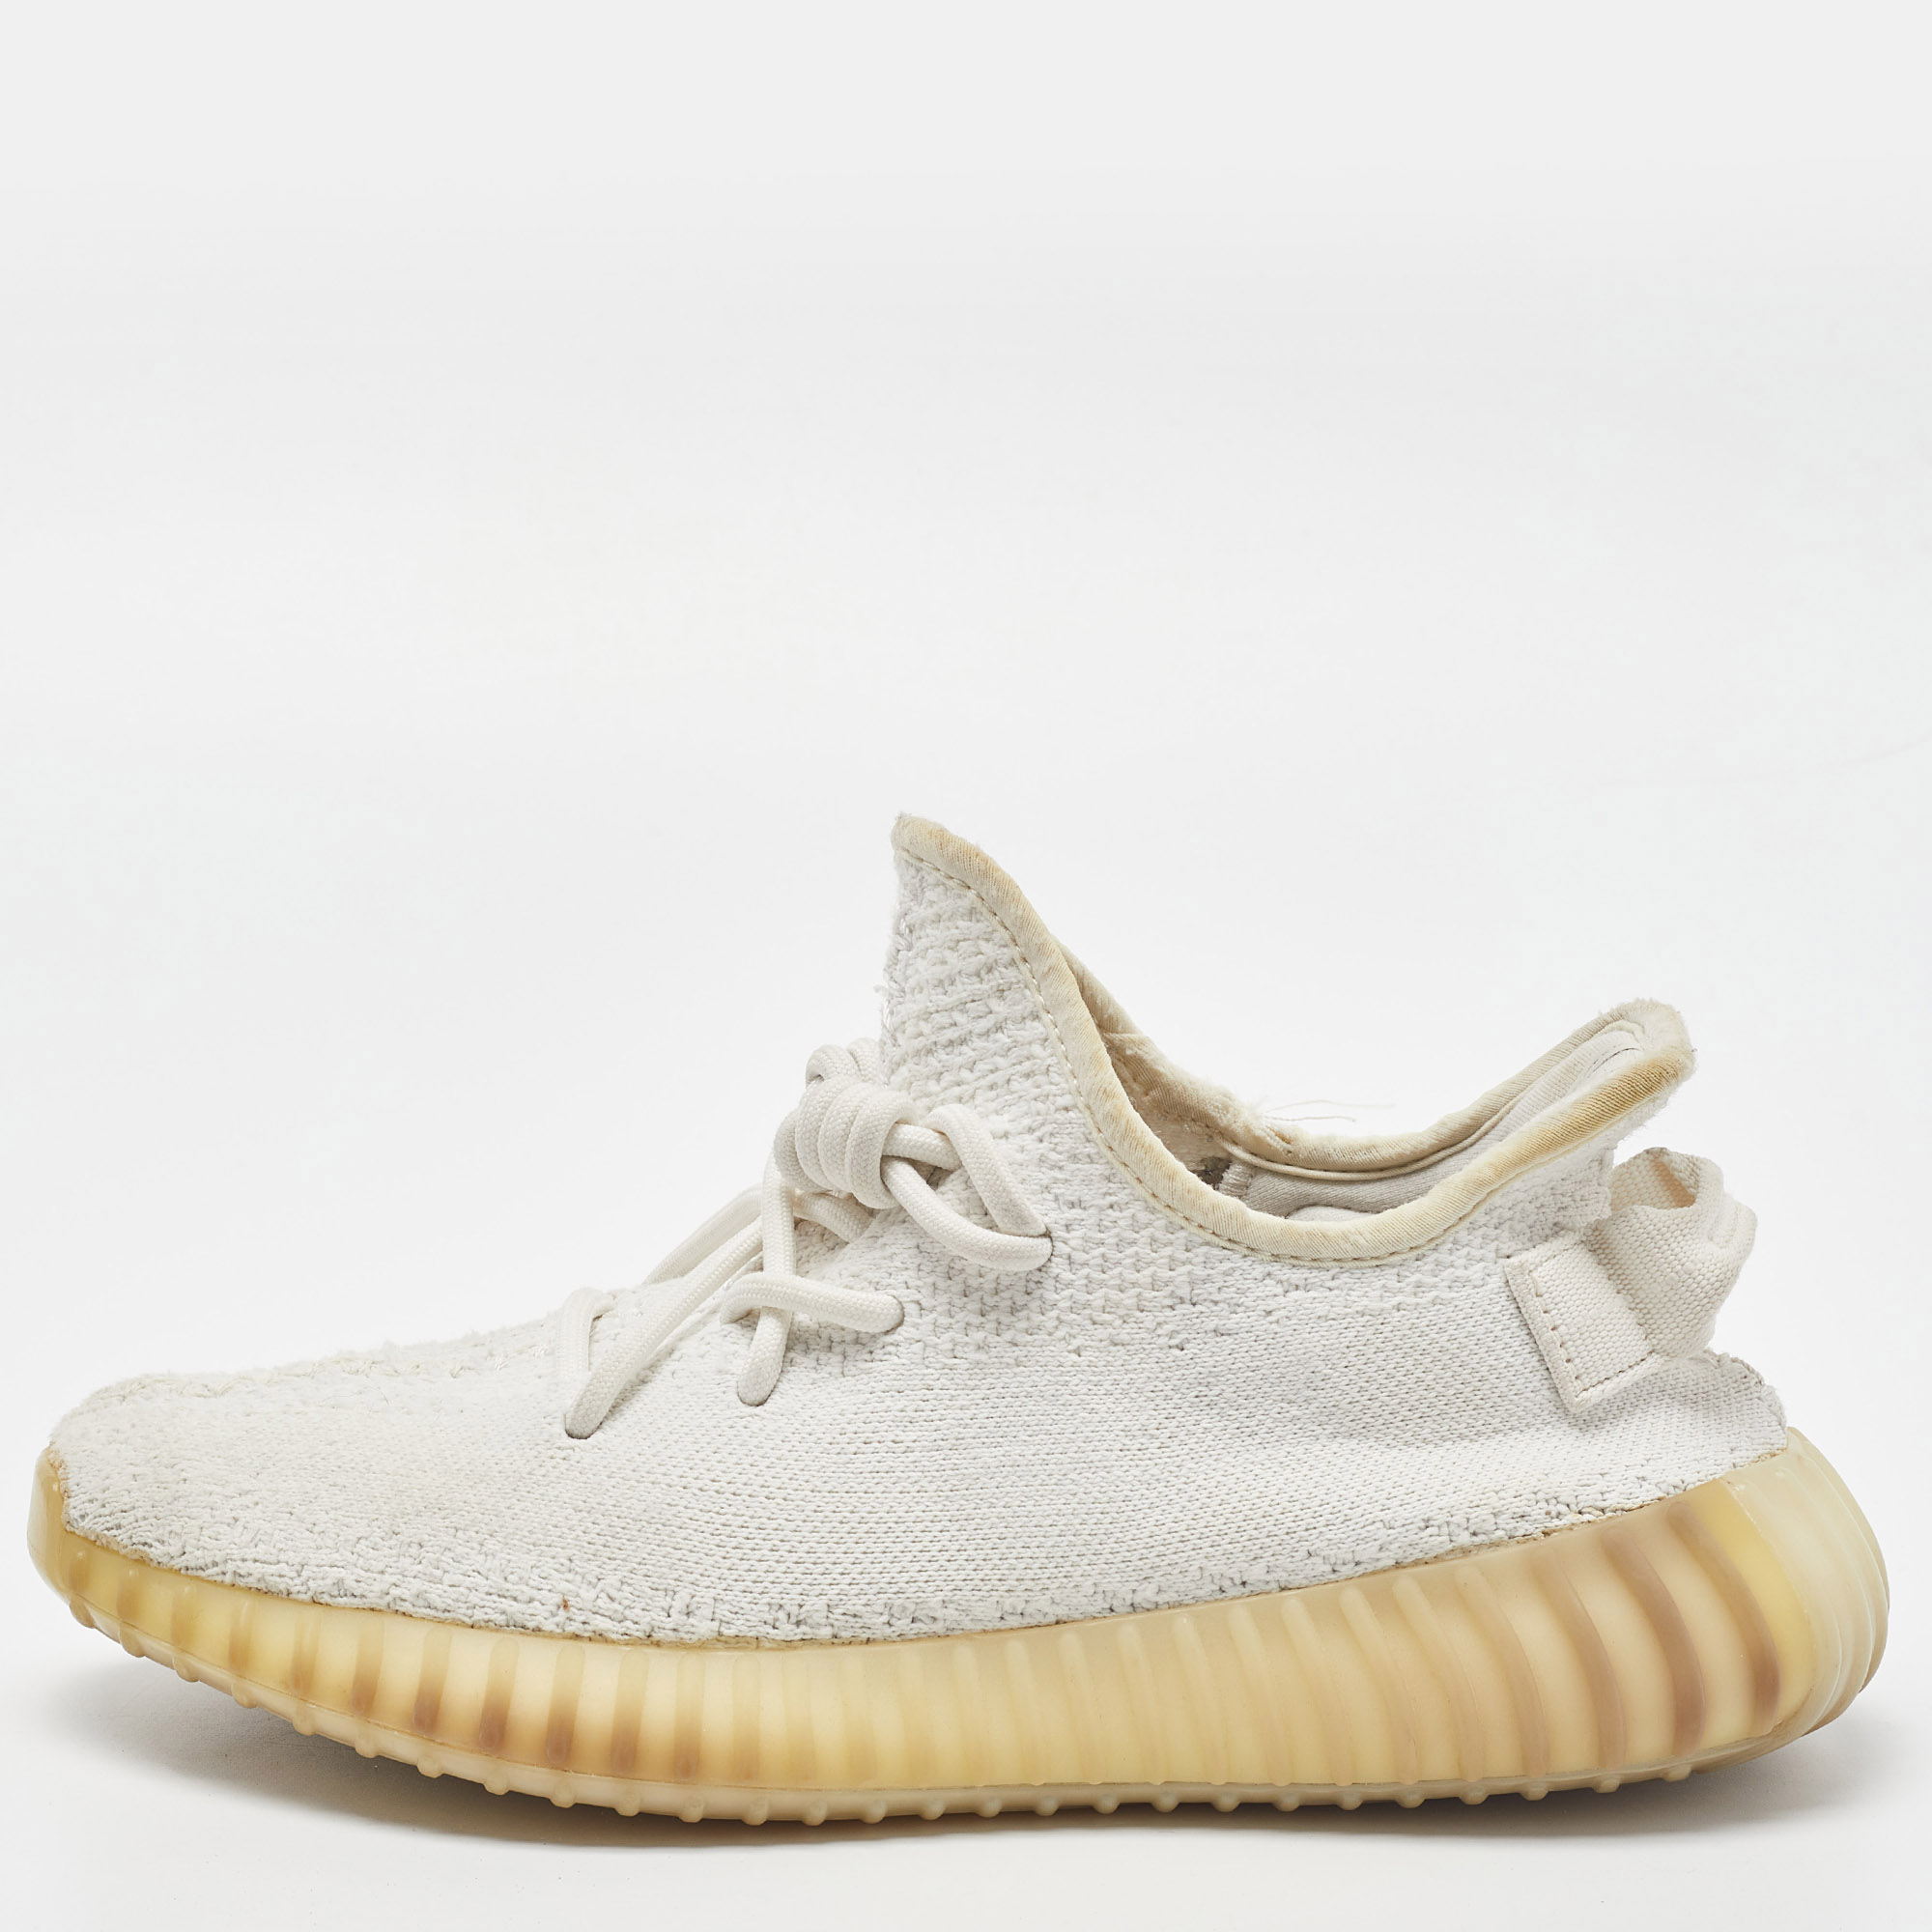 

Yeezy x Adidas Cream Knit Fabric Boost 350 V2 Cream Sneakers Size 38 2/3